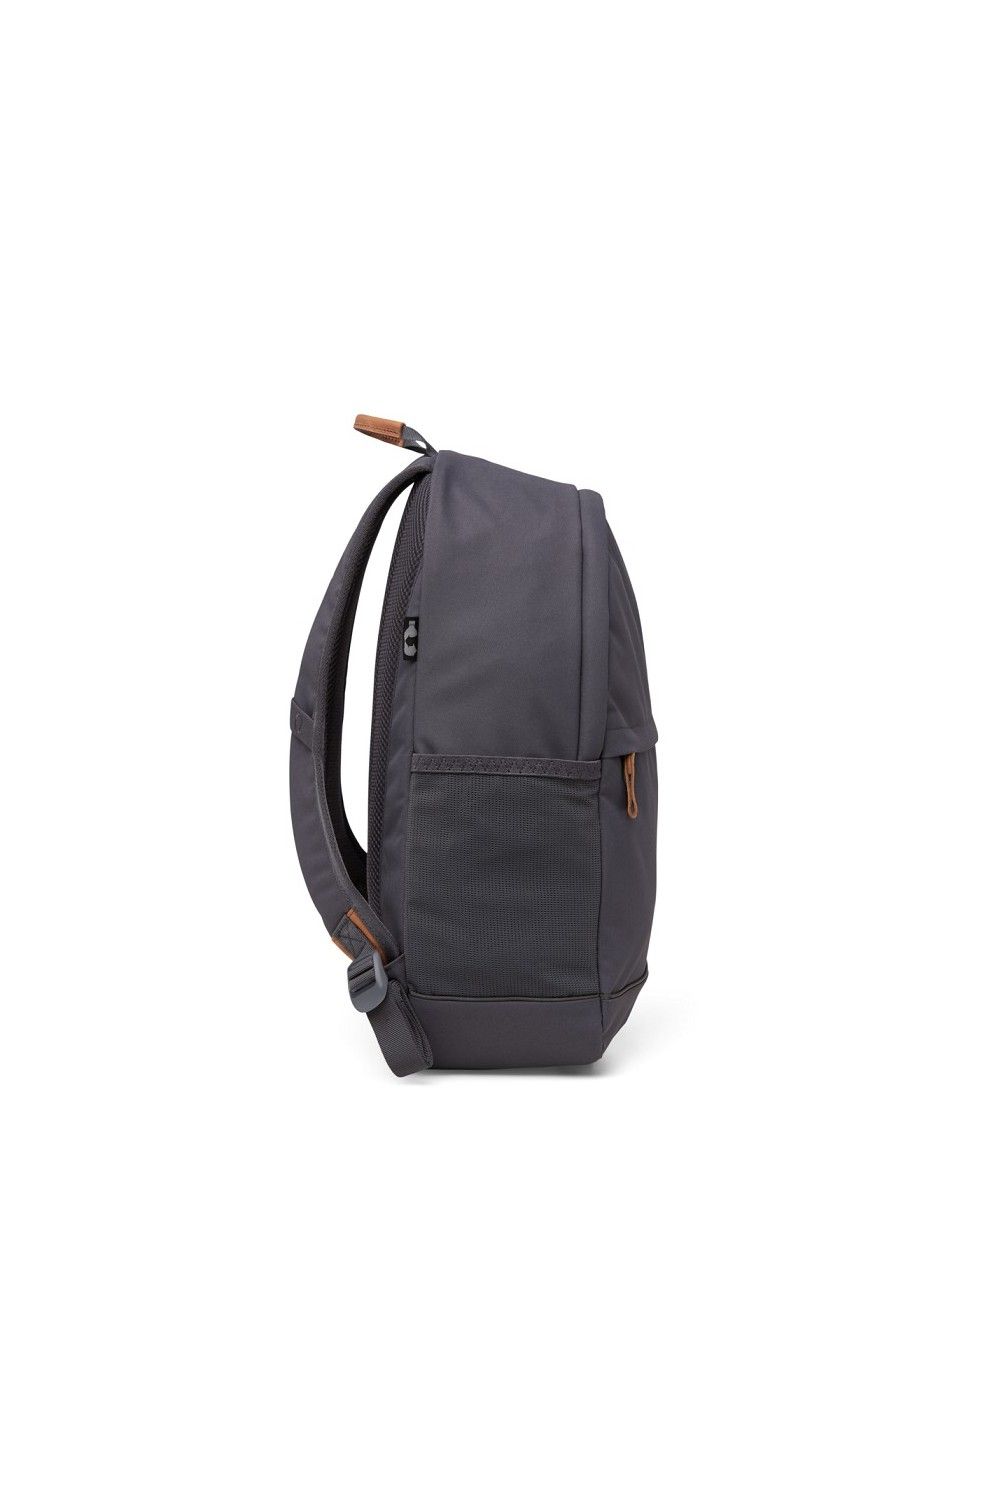 Satch Backpack Fly Nordic Grey